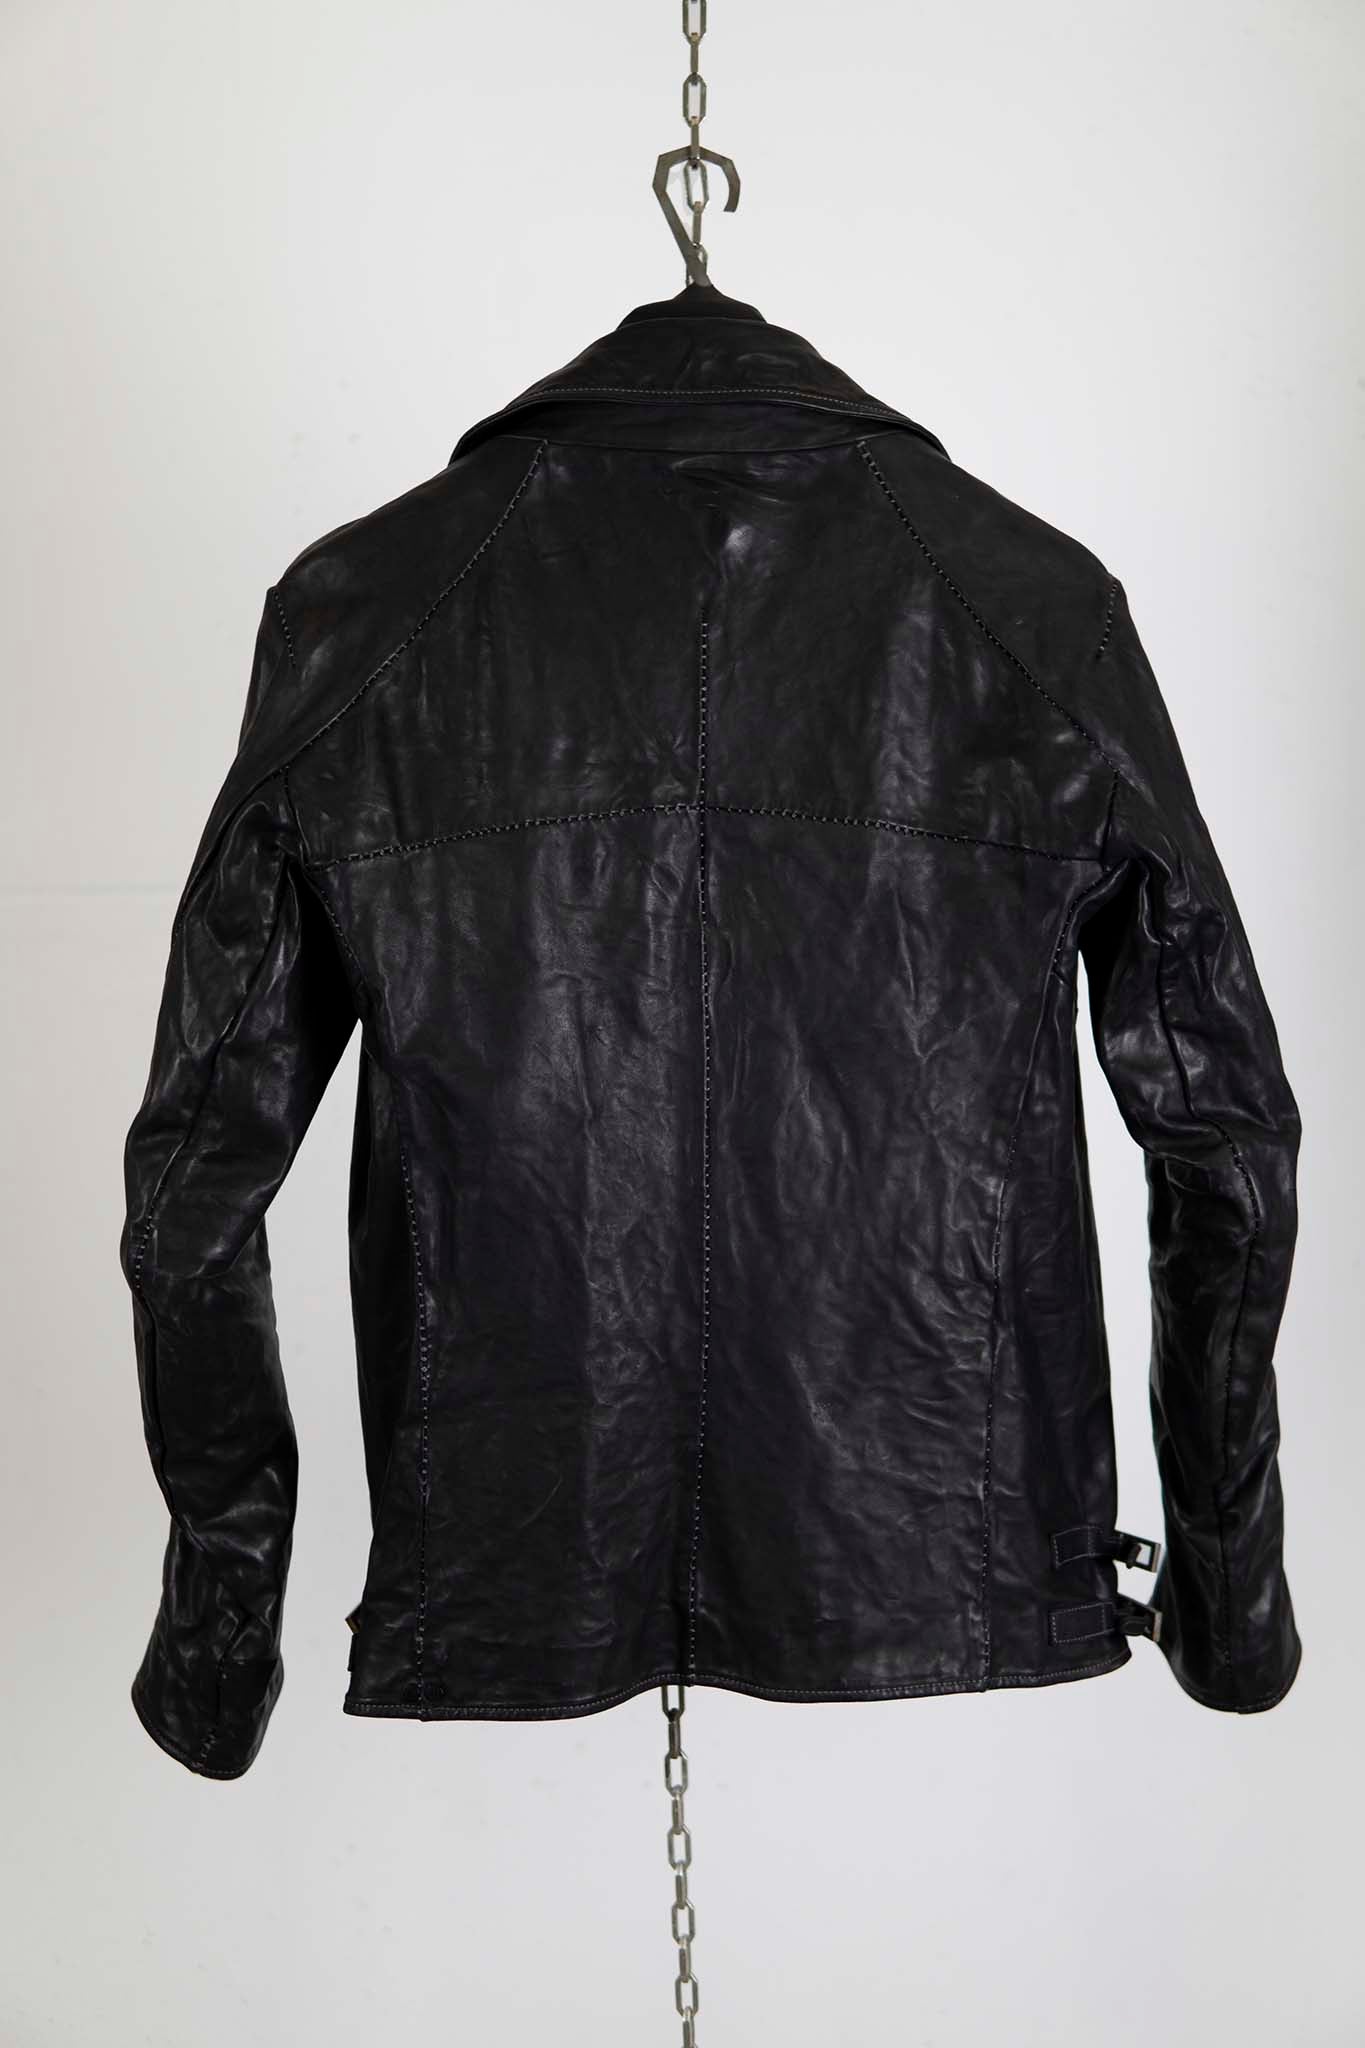 HORSE LEATHER DOUBLE BREAST BIKER JACKET MB-2S